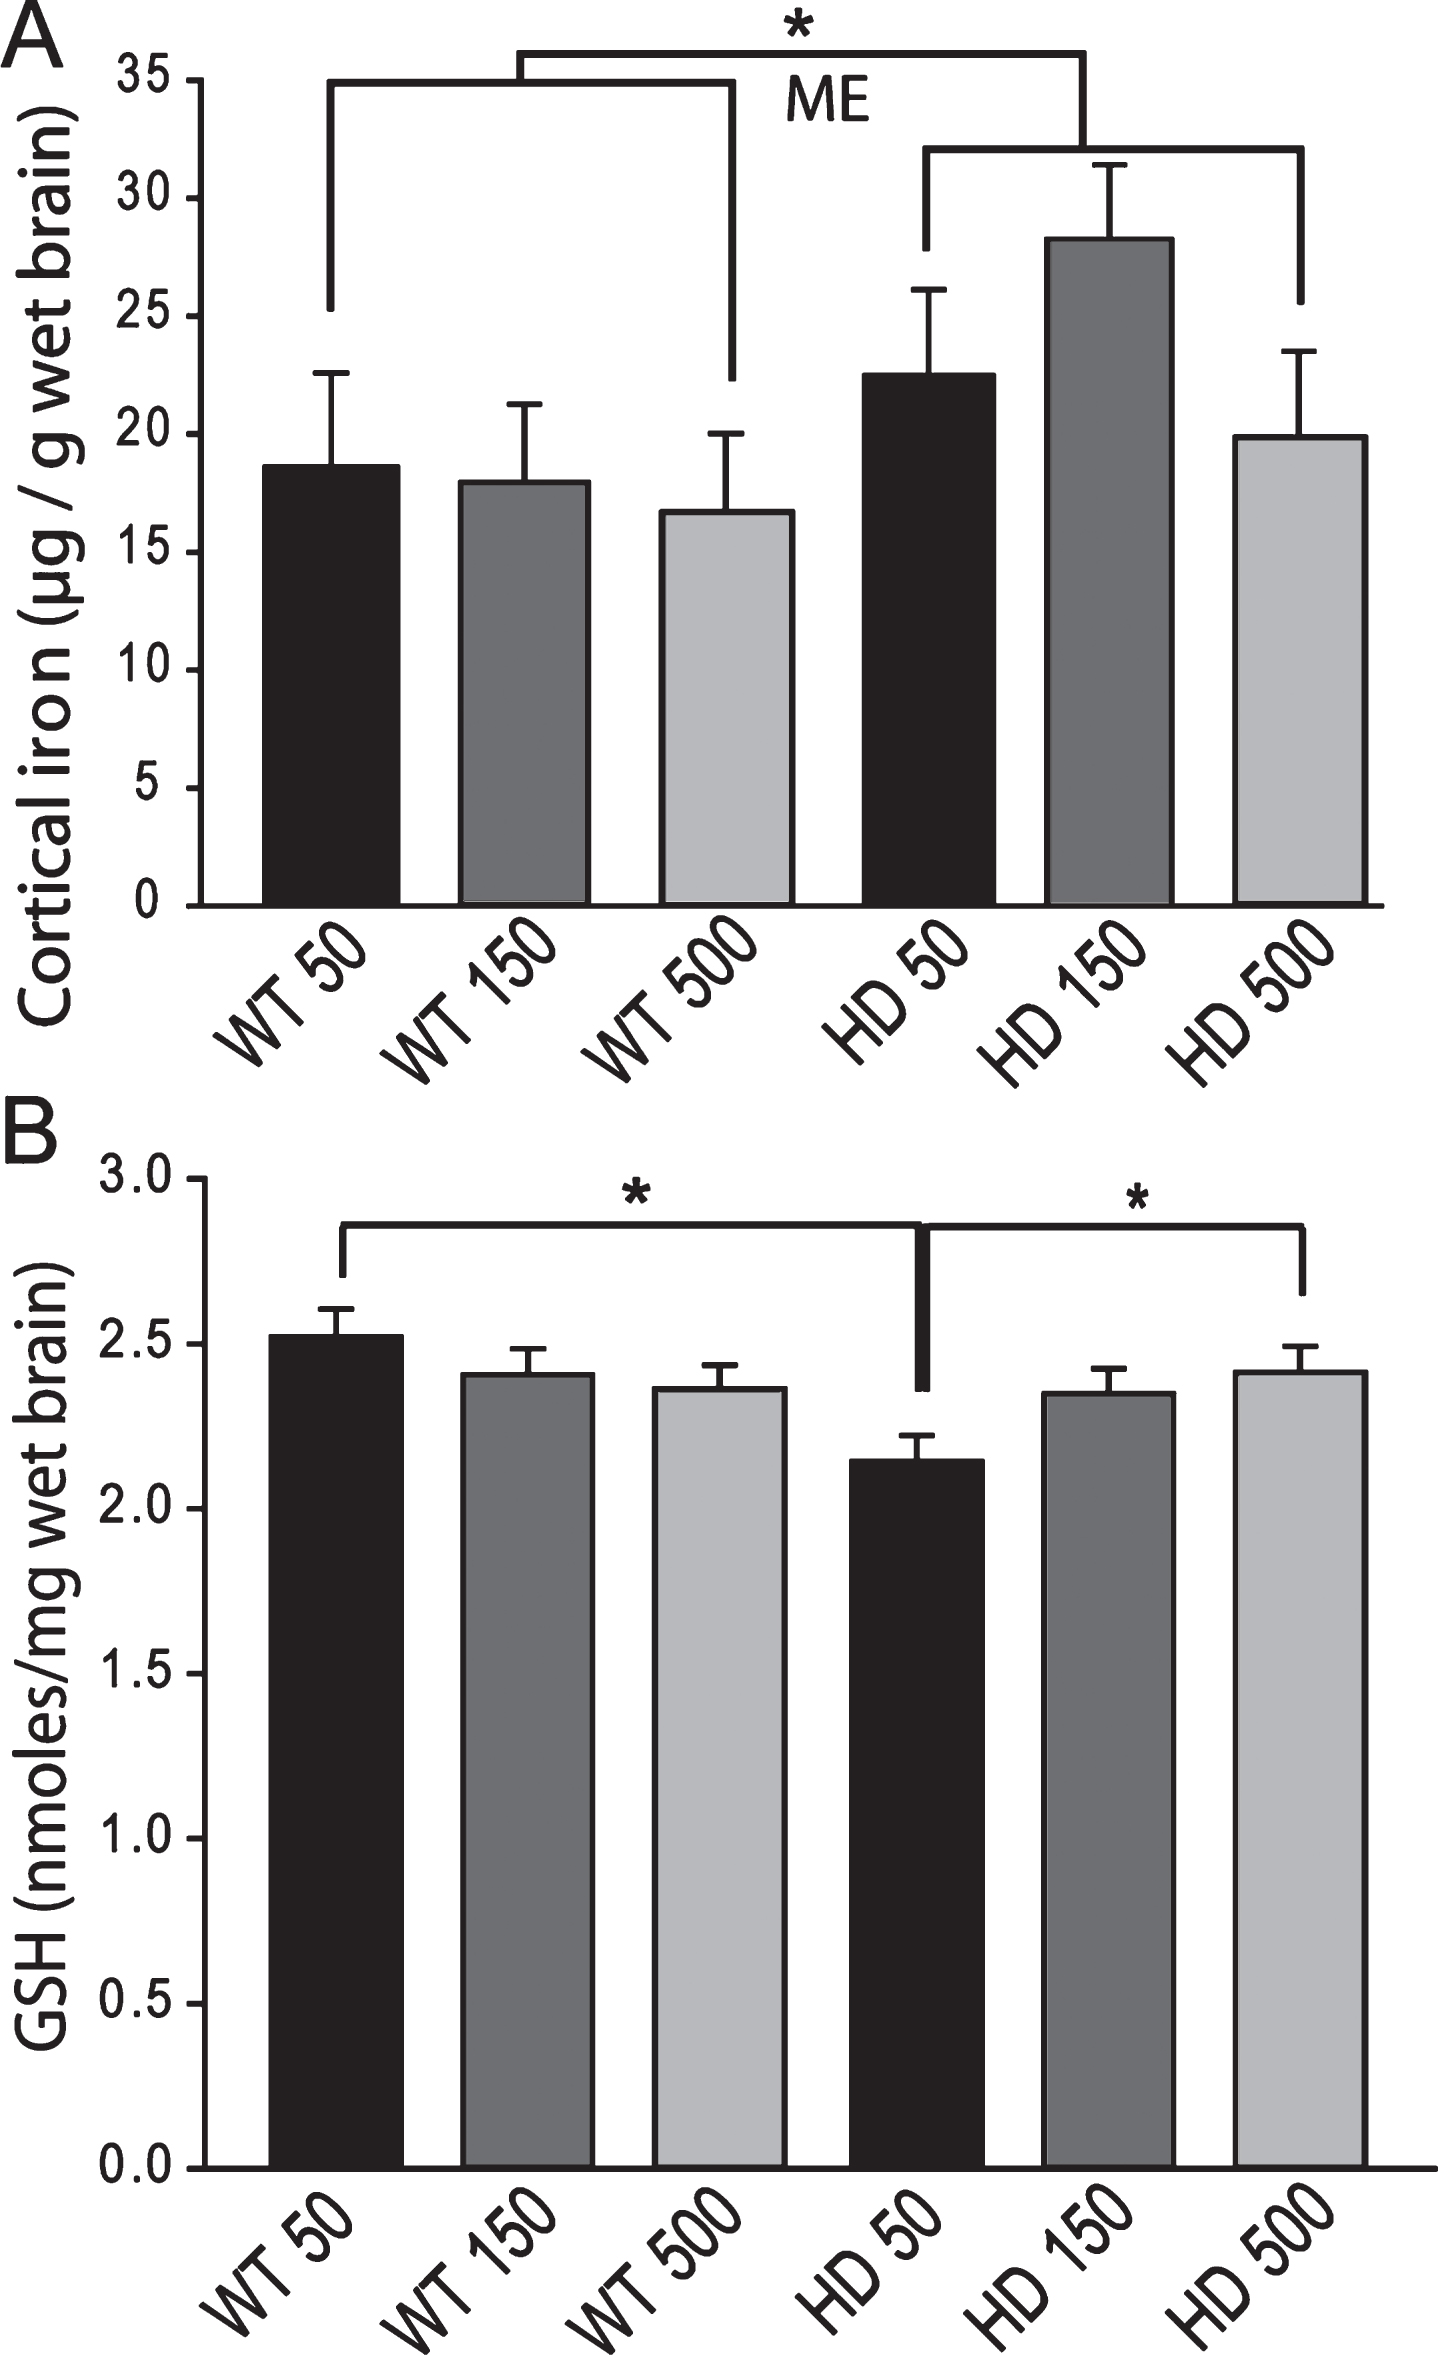 Brain iron and glutathione status in YAC128 HD mice supplemented with different levels of iron as adults. Mice were maintained on diets from 2–12 months of age. A. Cerebro-cortical iron levels are increased in HD mice but are not altered by iron-intake level. There was a significant effect of genotype (ME = main effect comparison). n = 5–9, B. Cortical GSH in wild-type is not altered by iron-intake level. Low versus high iron intake (150 and 500 ppm iron, respectively) results in decreased cortical glutathione in YAC128 mice. P-value: *p < 0.05, n = 9–11.